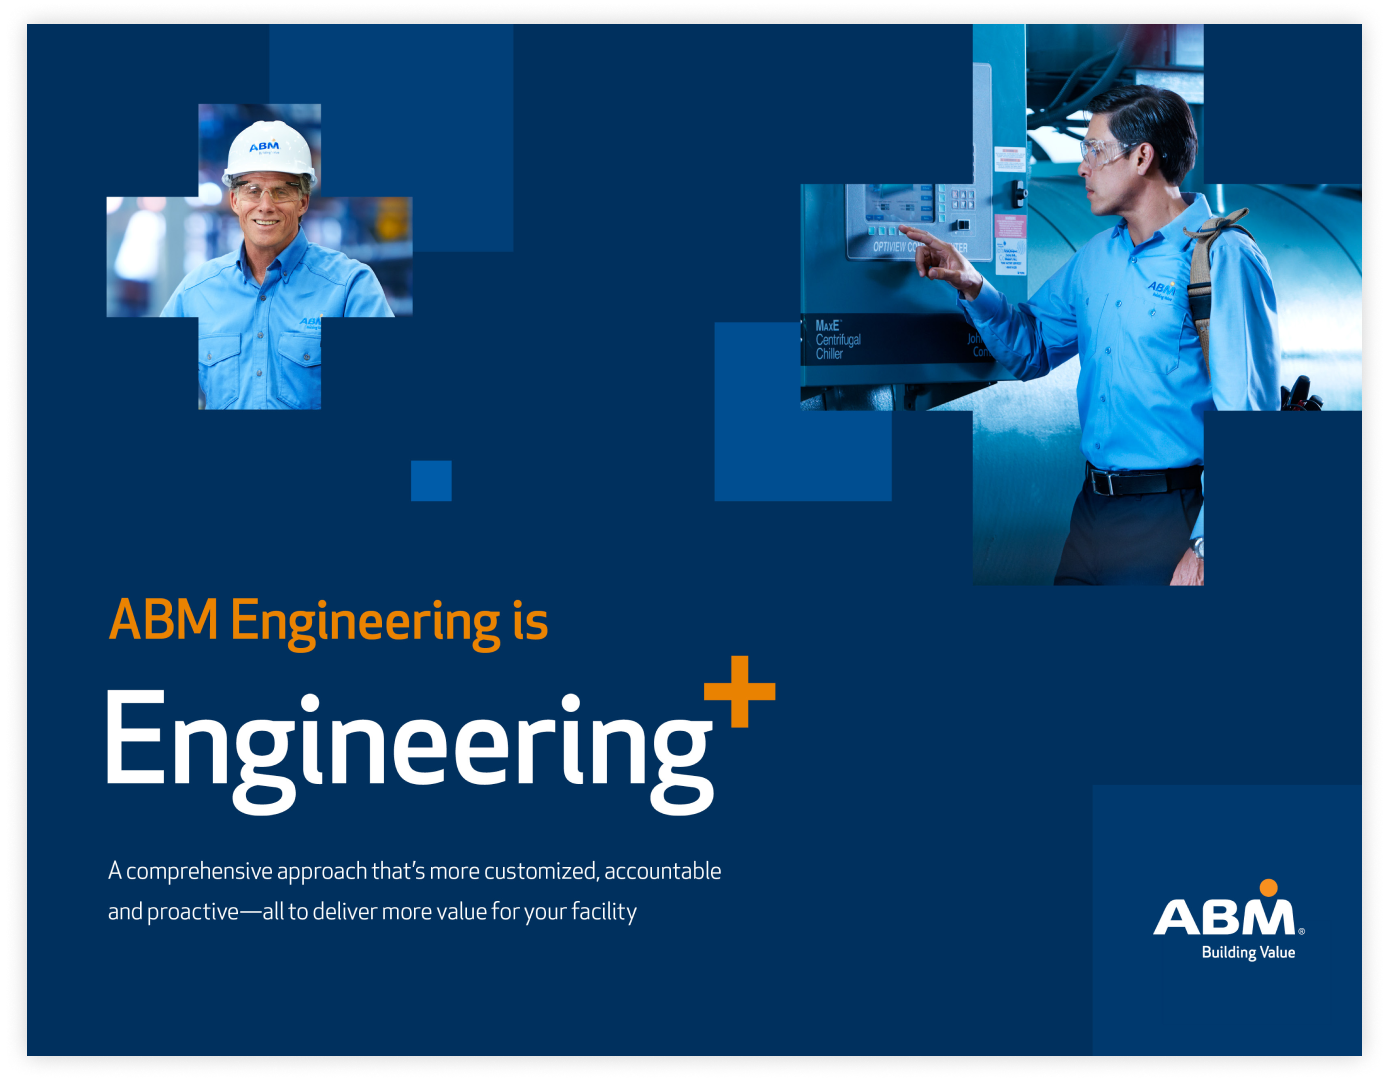 Cover of ebook featuring two male ABM engineers framed within plus signs. Headline reads “ABM Engineering is Engineering+”